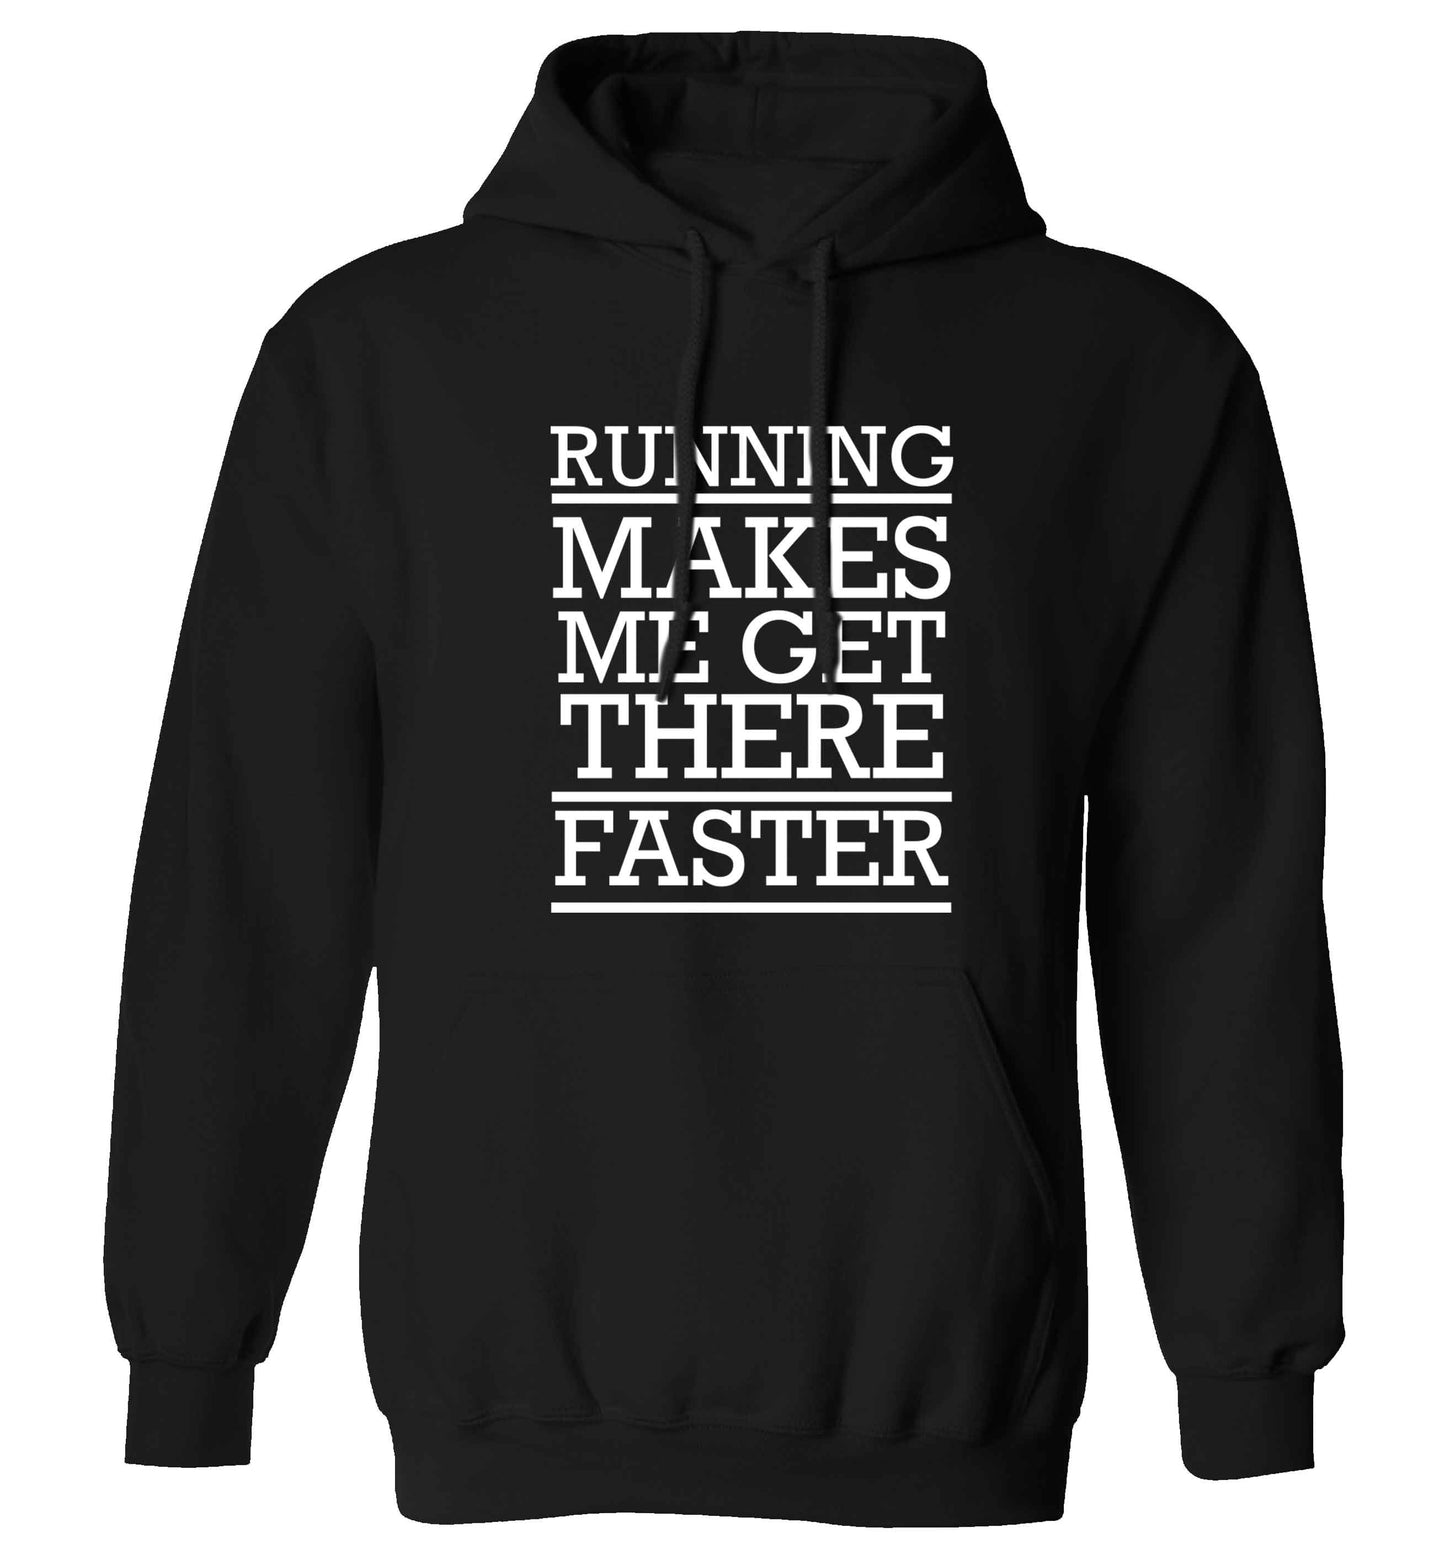 Running makes me get there faster adults unisex black hoodie 2XL